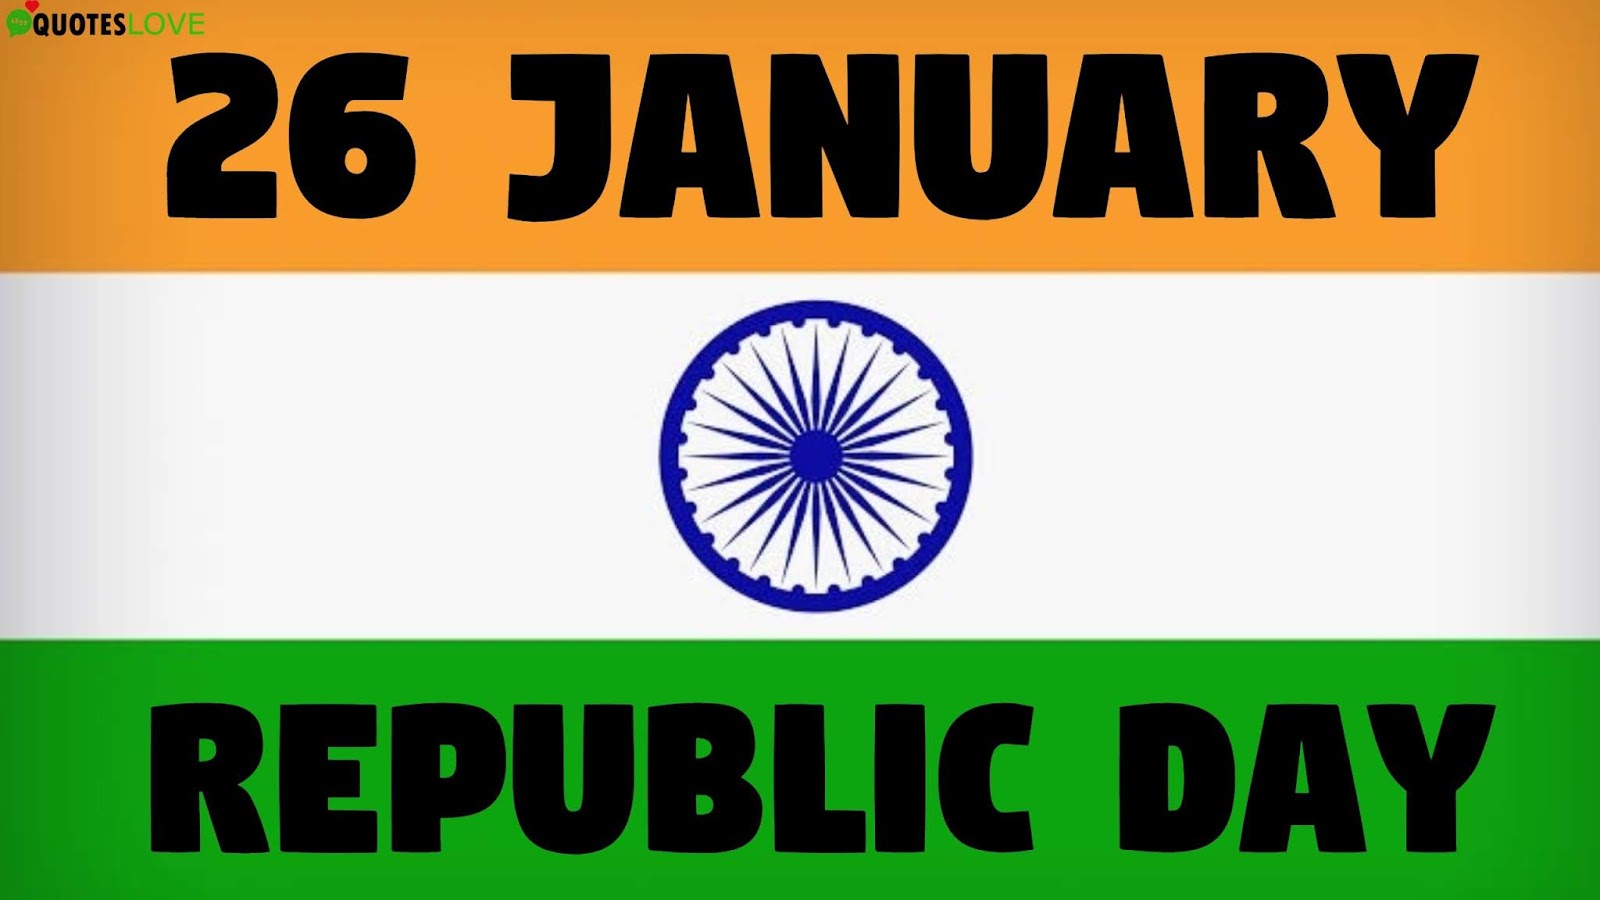 171+ (Best) 26 January: Happy Republic Day Quotes, Wishes, Slogans, Messages, SMS, Images For Whatsapp & Facebook